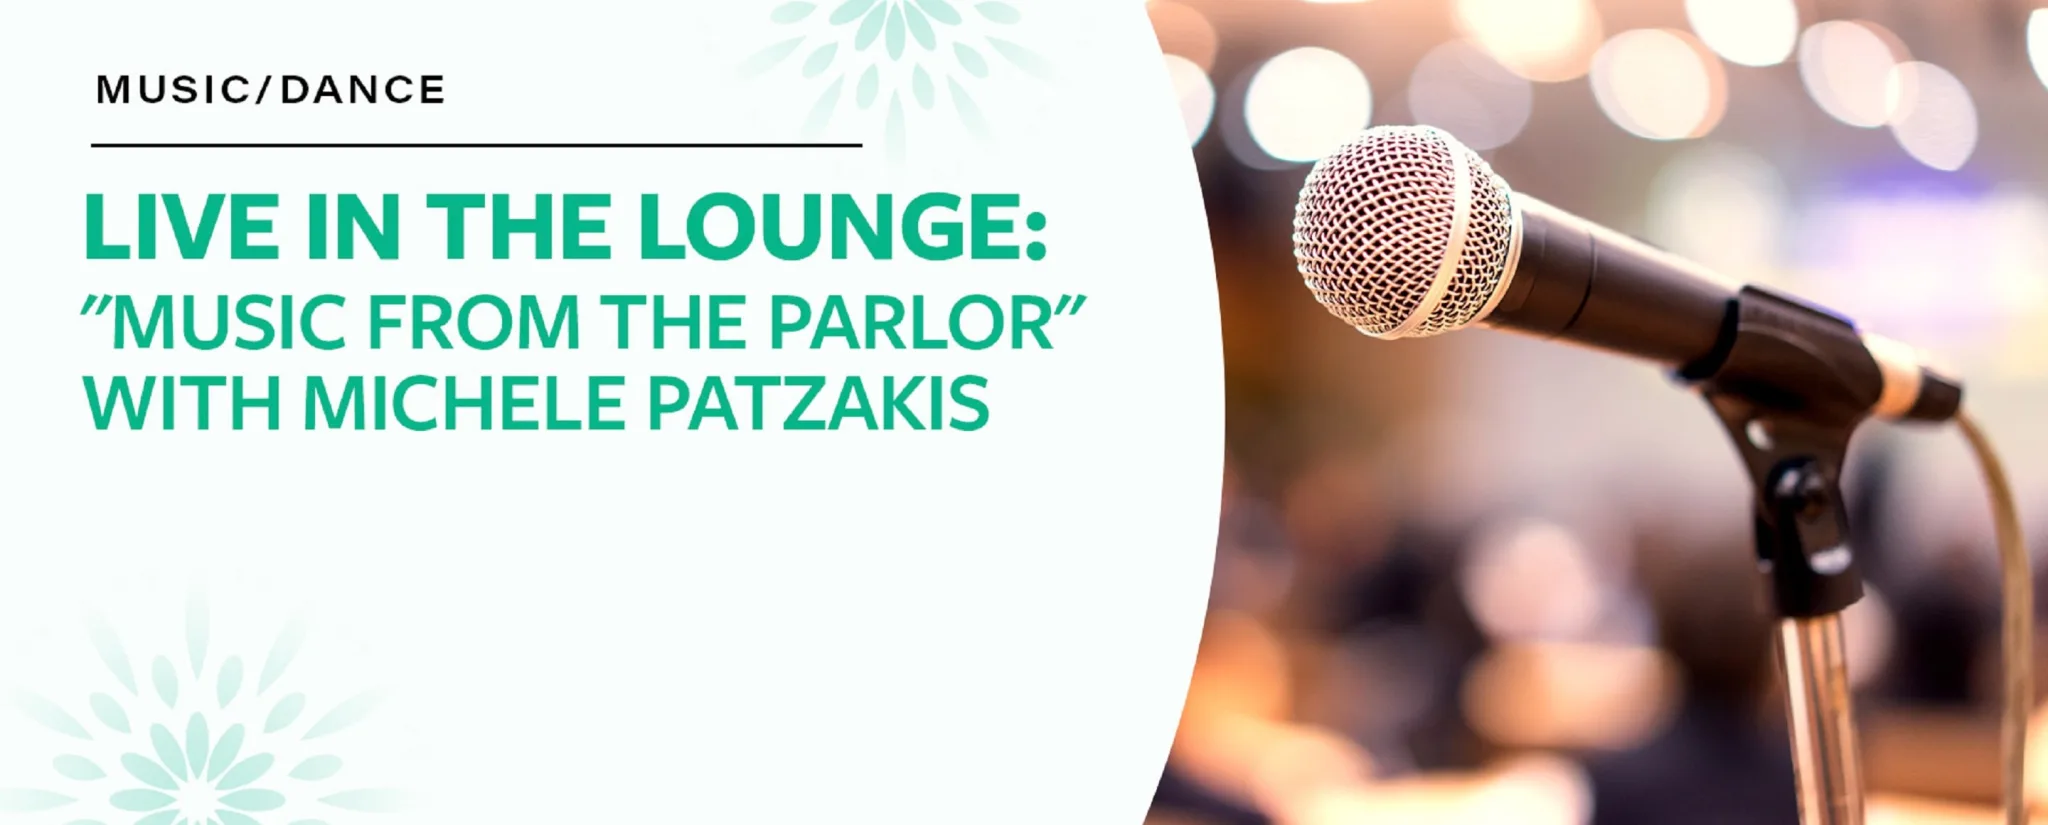 Live in the Lounge: Music from the Parlor with Michele Patzakis